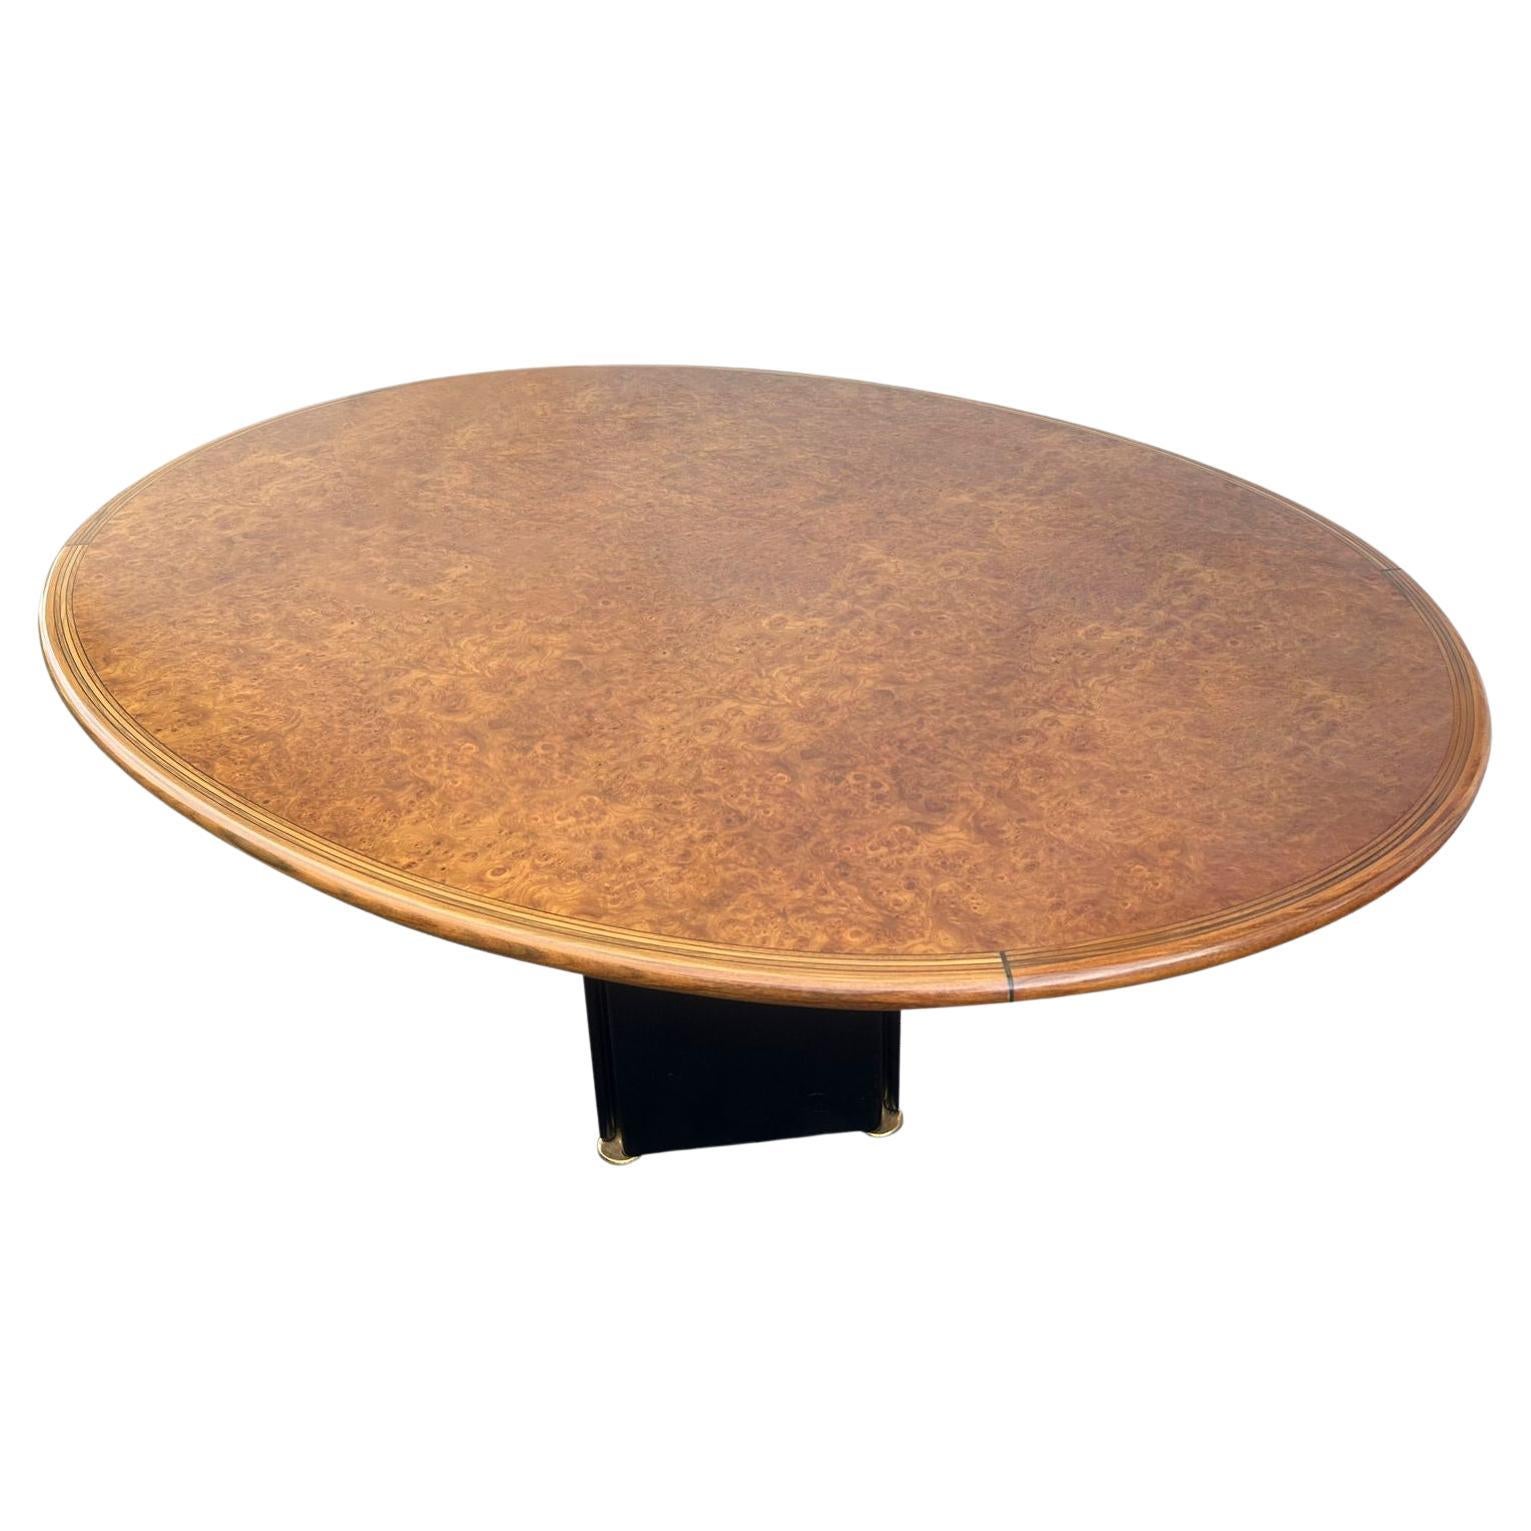 Oval Africa dining table by Afra and Tobia Scarpa for Maxalto Italy 1970s